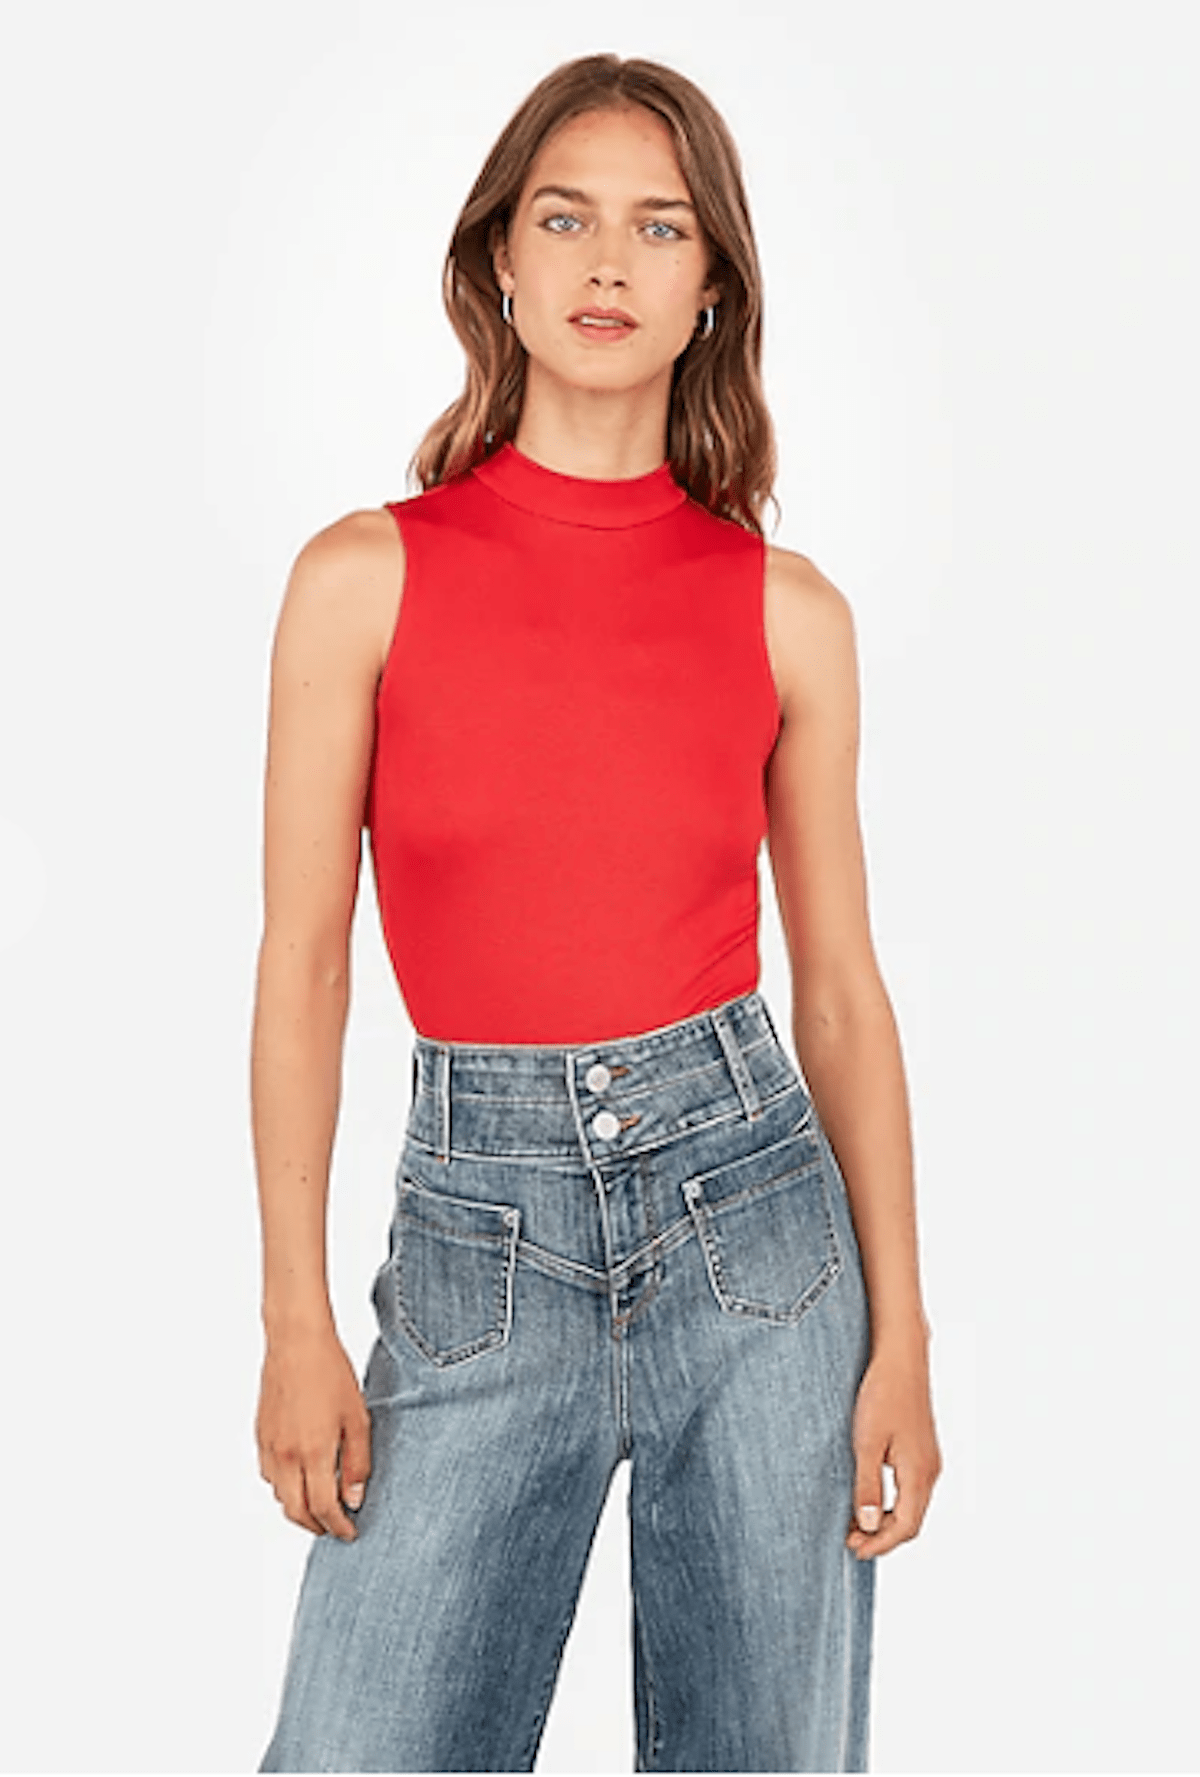 This Express Mock Neck Bodysuit Is Perfect for Fall Layering | Us Weekly